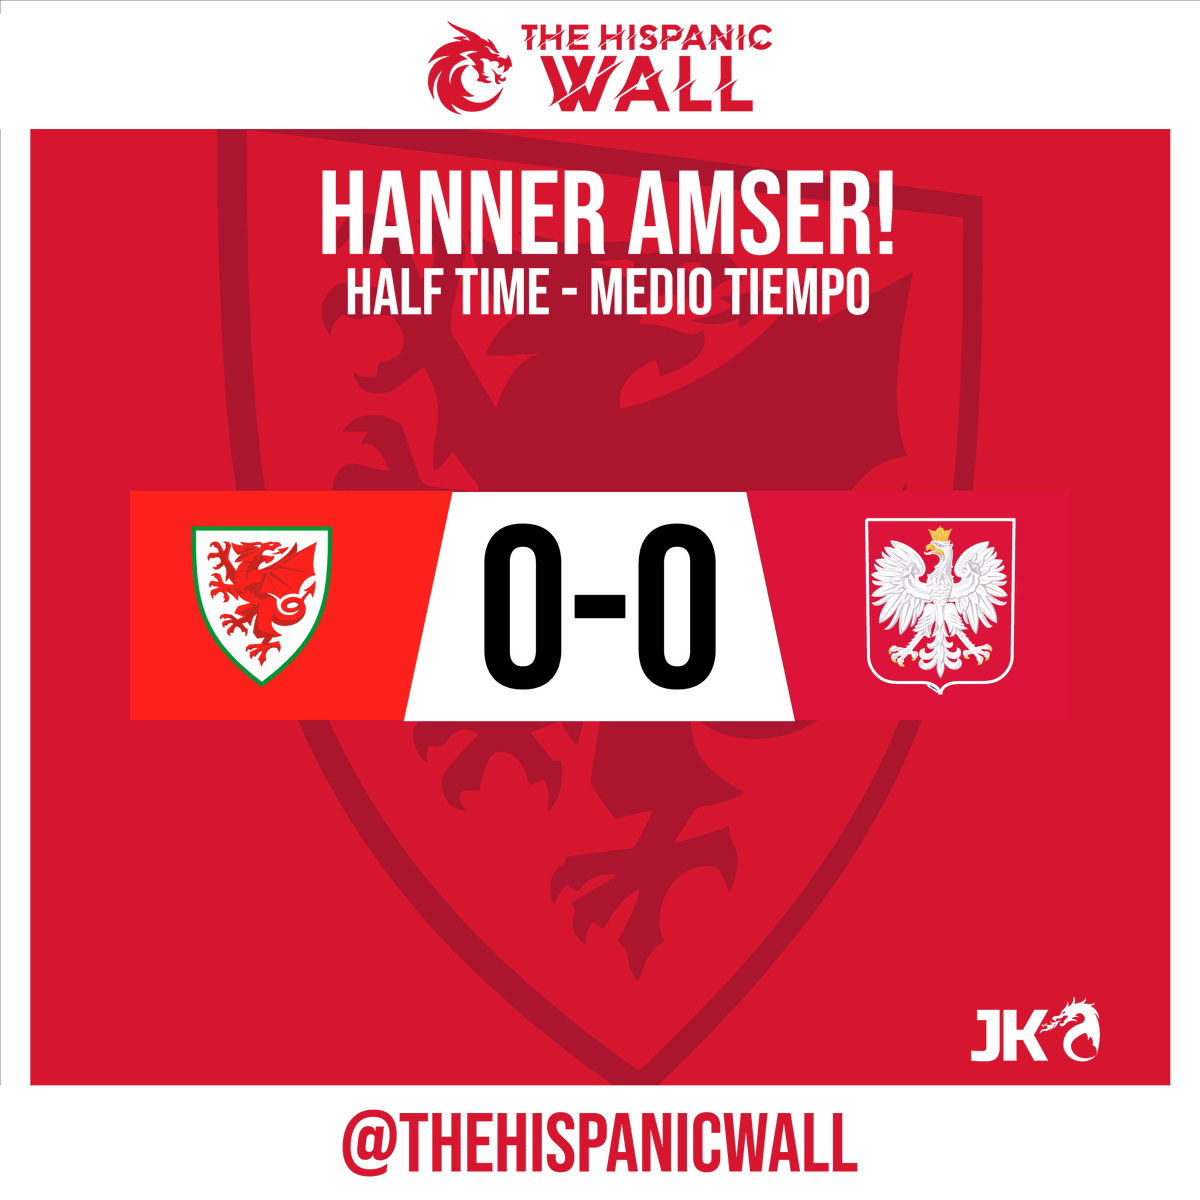 HT' 🏴󠁧󠁢󠁷󠁬󠁳󠁿 0-0 🇵🇱
#TogetherStronger #YWalGoch #TheHispanicWall